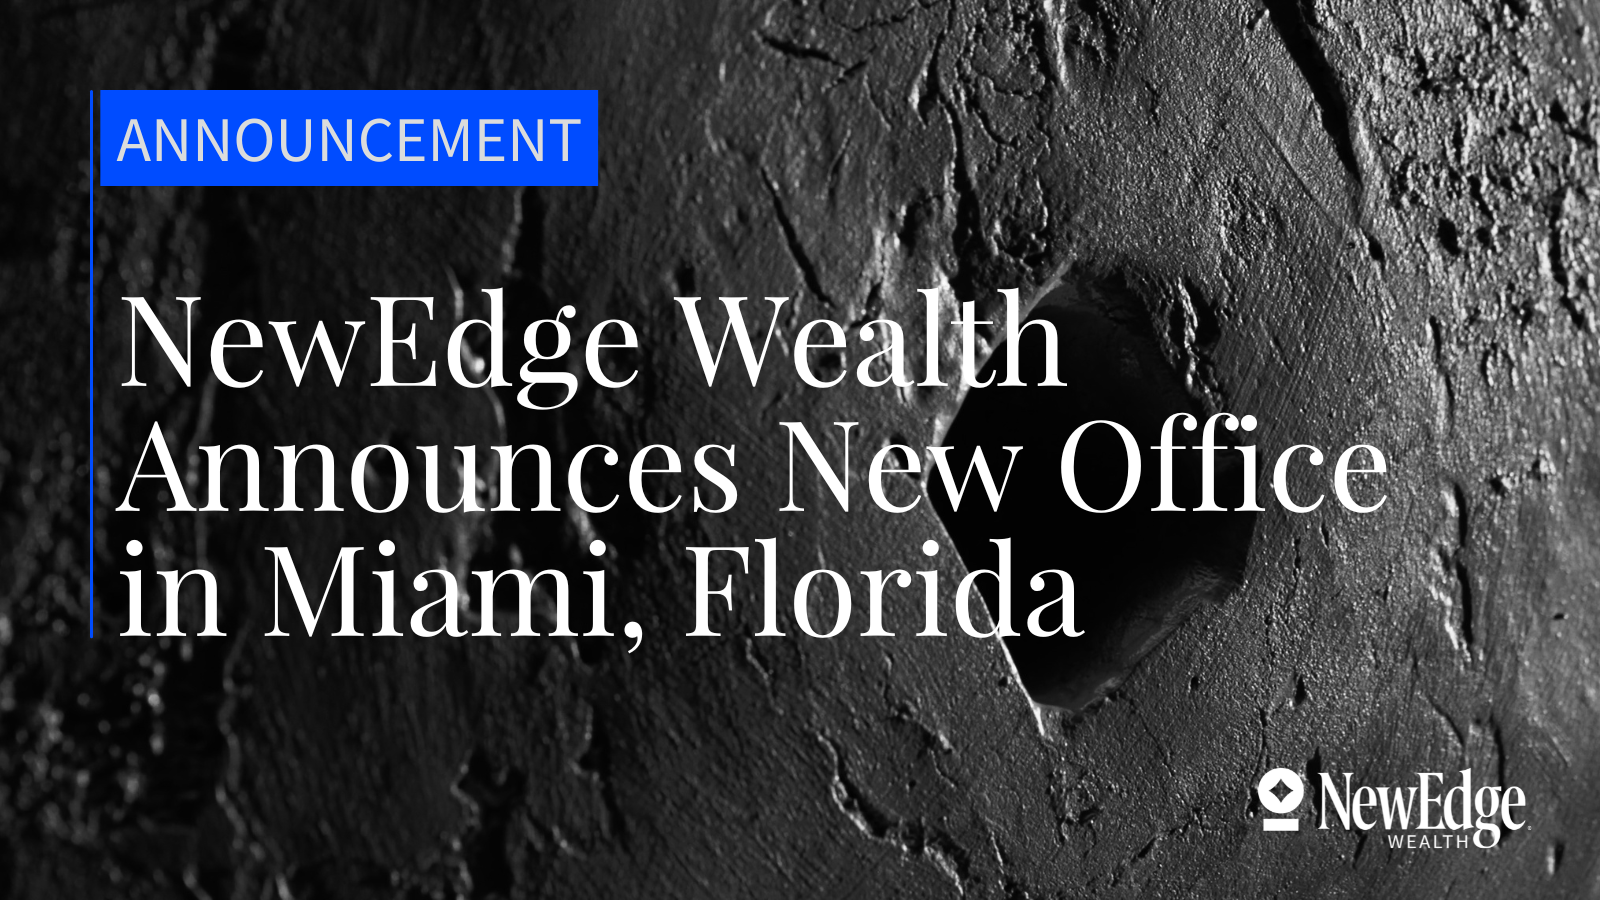 NewEdge Wealth Announces New Office in Miami, Florida